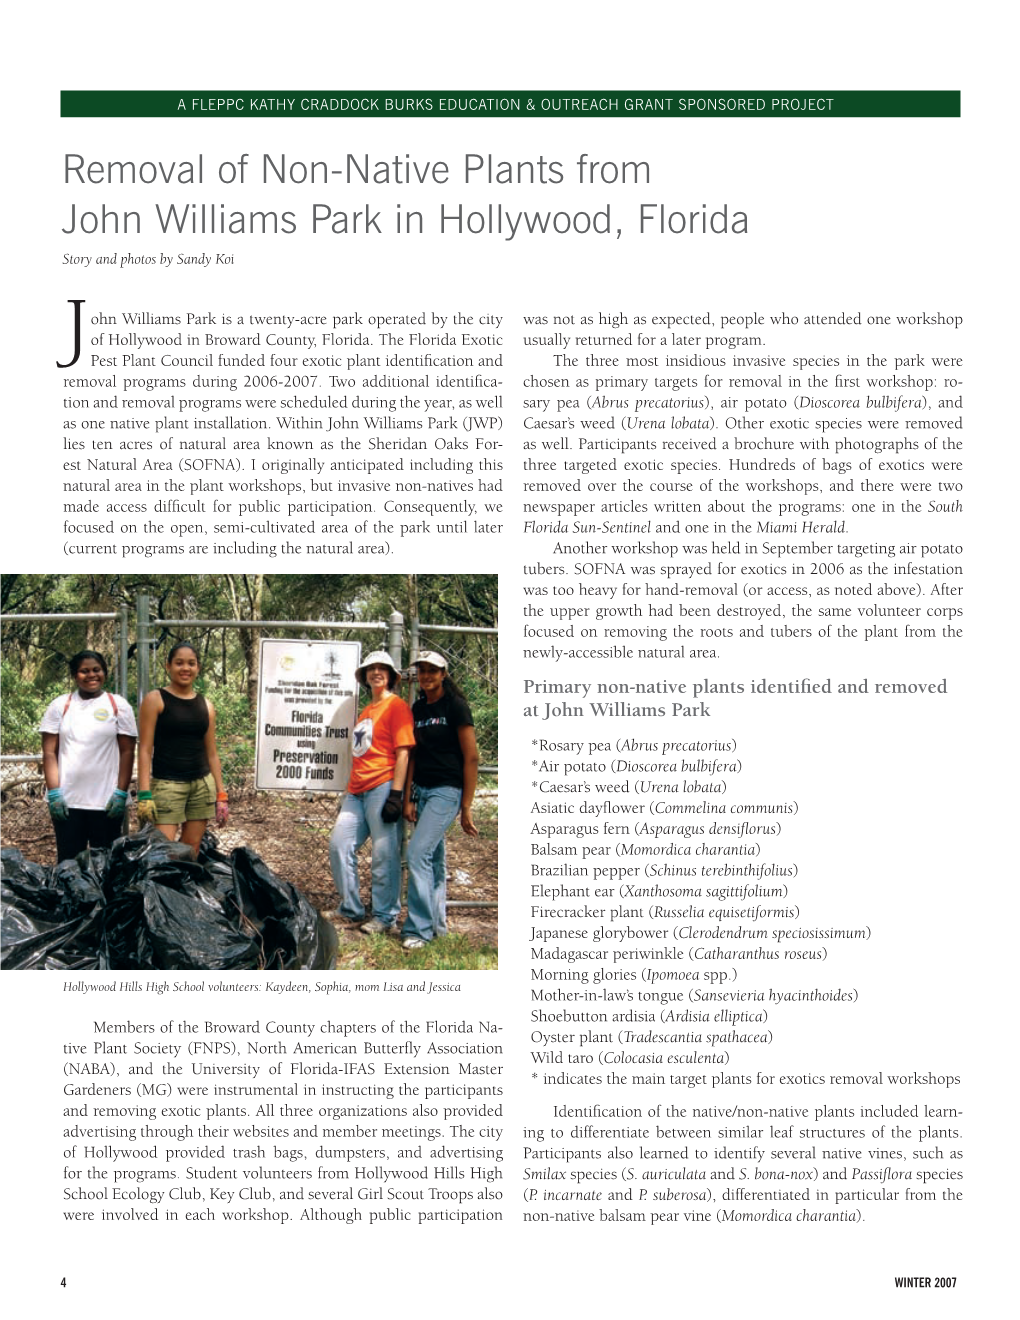 Removal of Non-Native Plants from John Williams Park in Hollywood, Florida Story and Photos by Sandy Koi